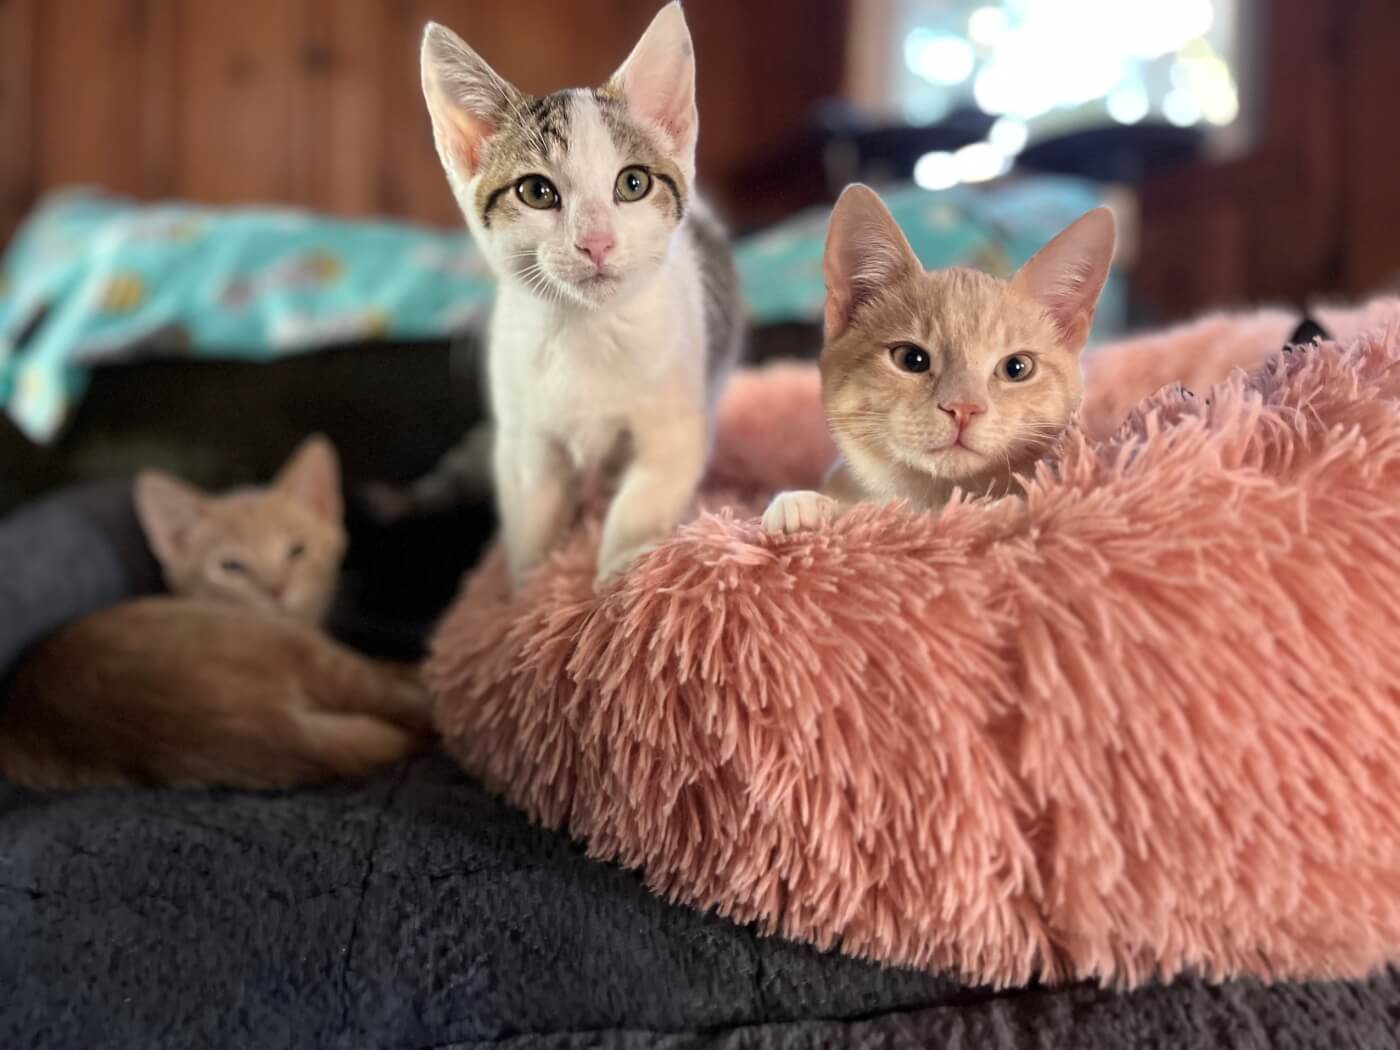 peta dog park kitten rescue5 From Fearful Five to Fabulous Friends: Meet These Adoptable Kittens